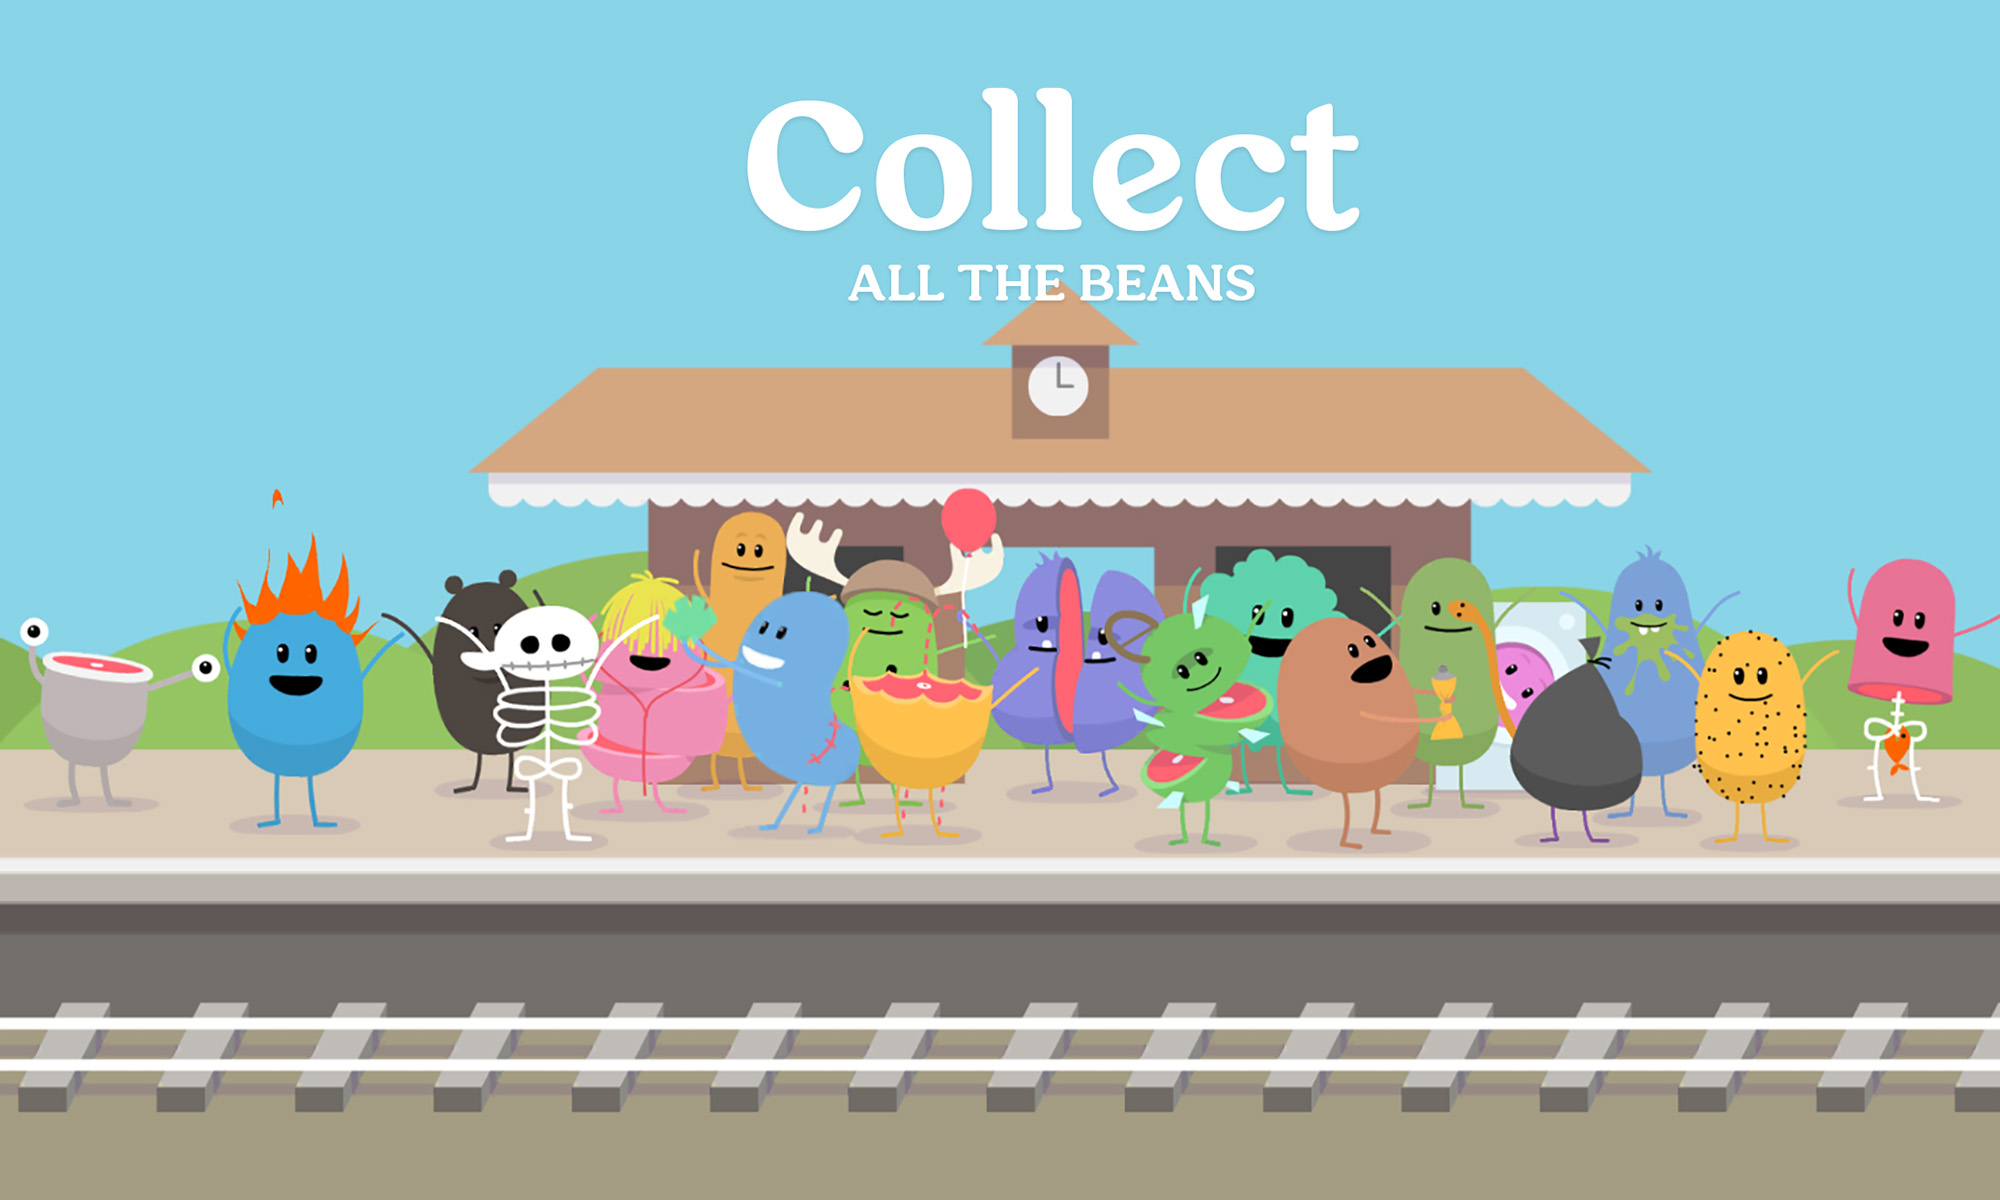 Dumb ways to die game - Collect all the beans